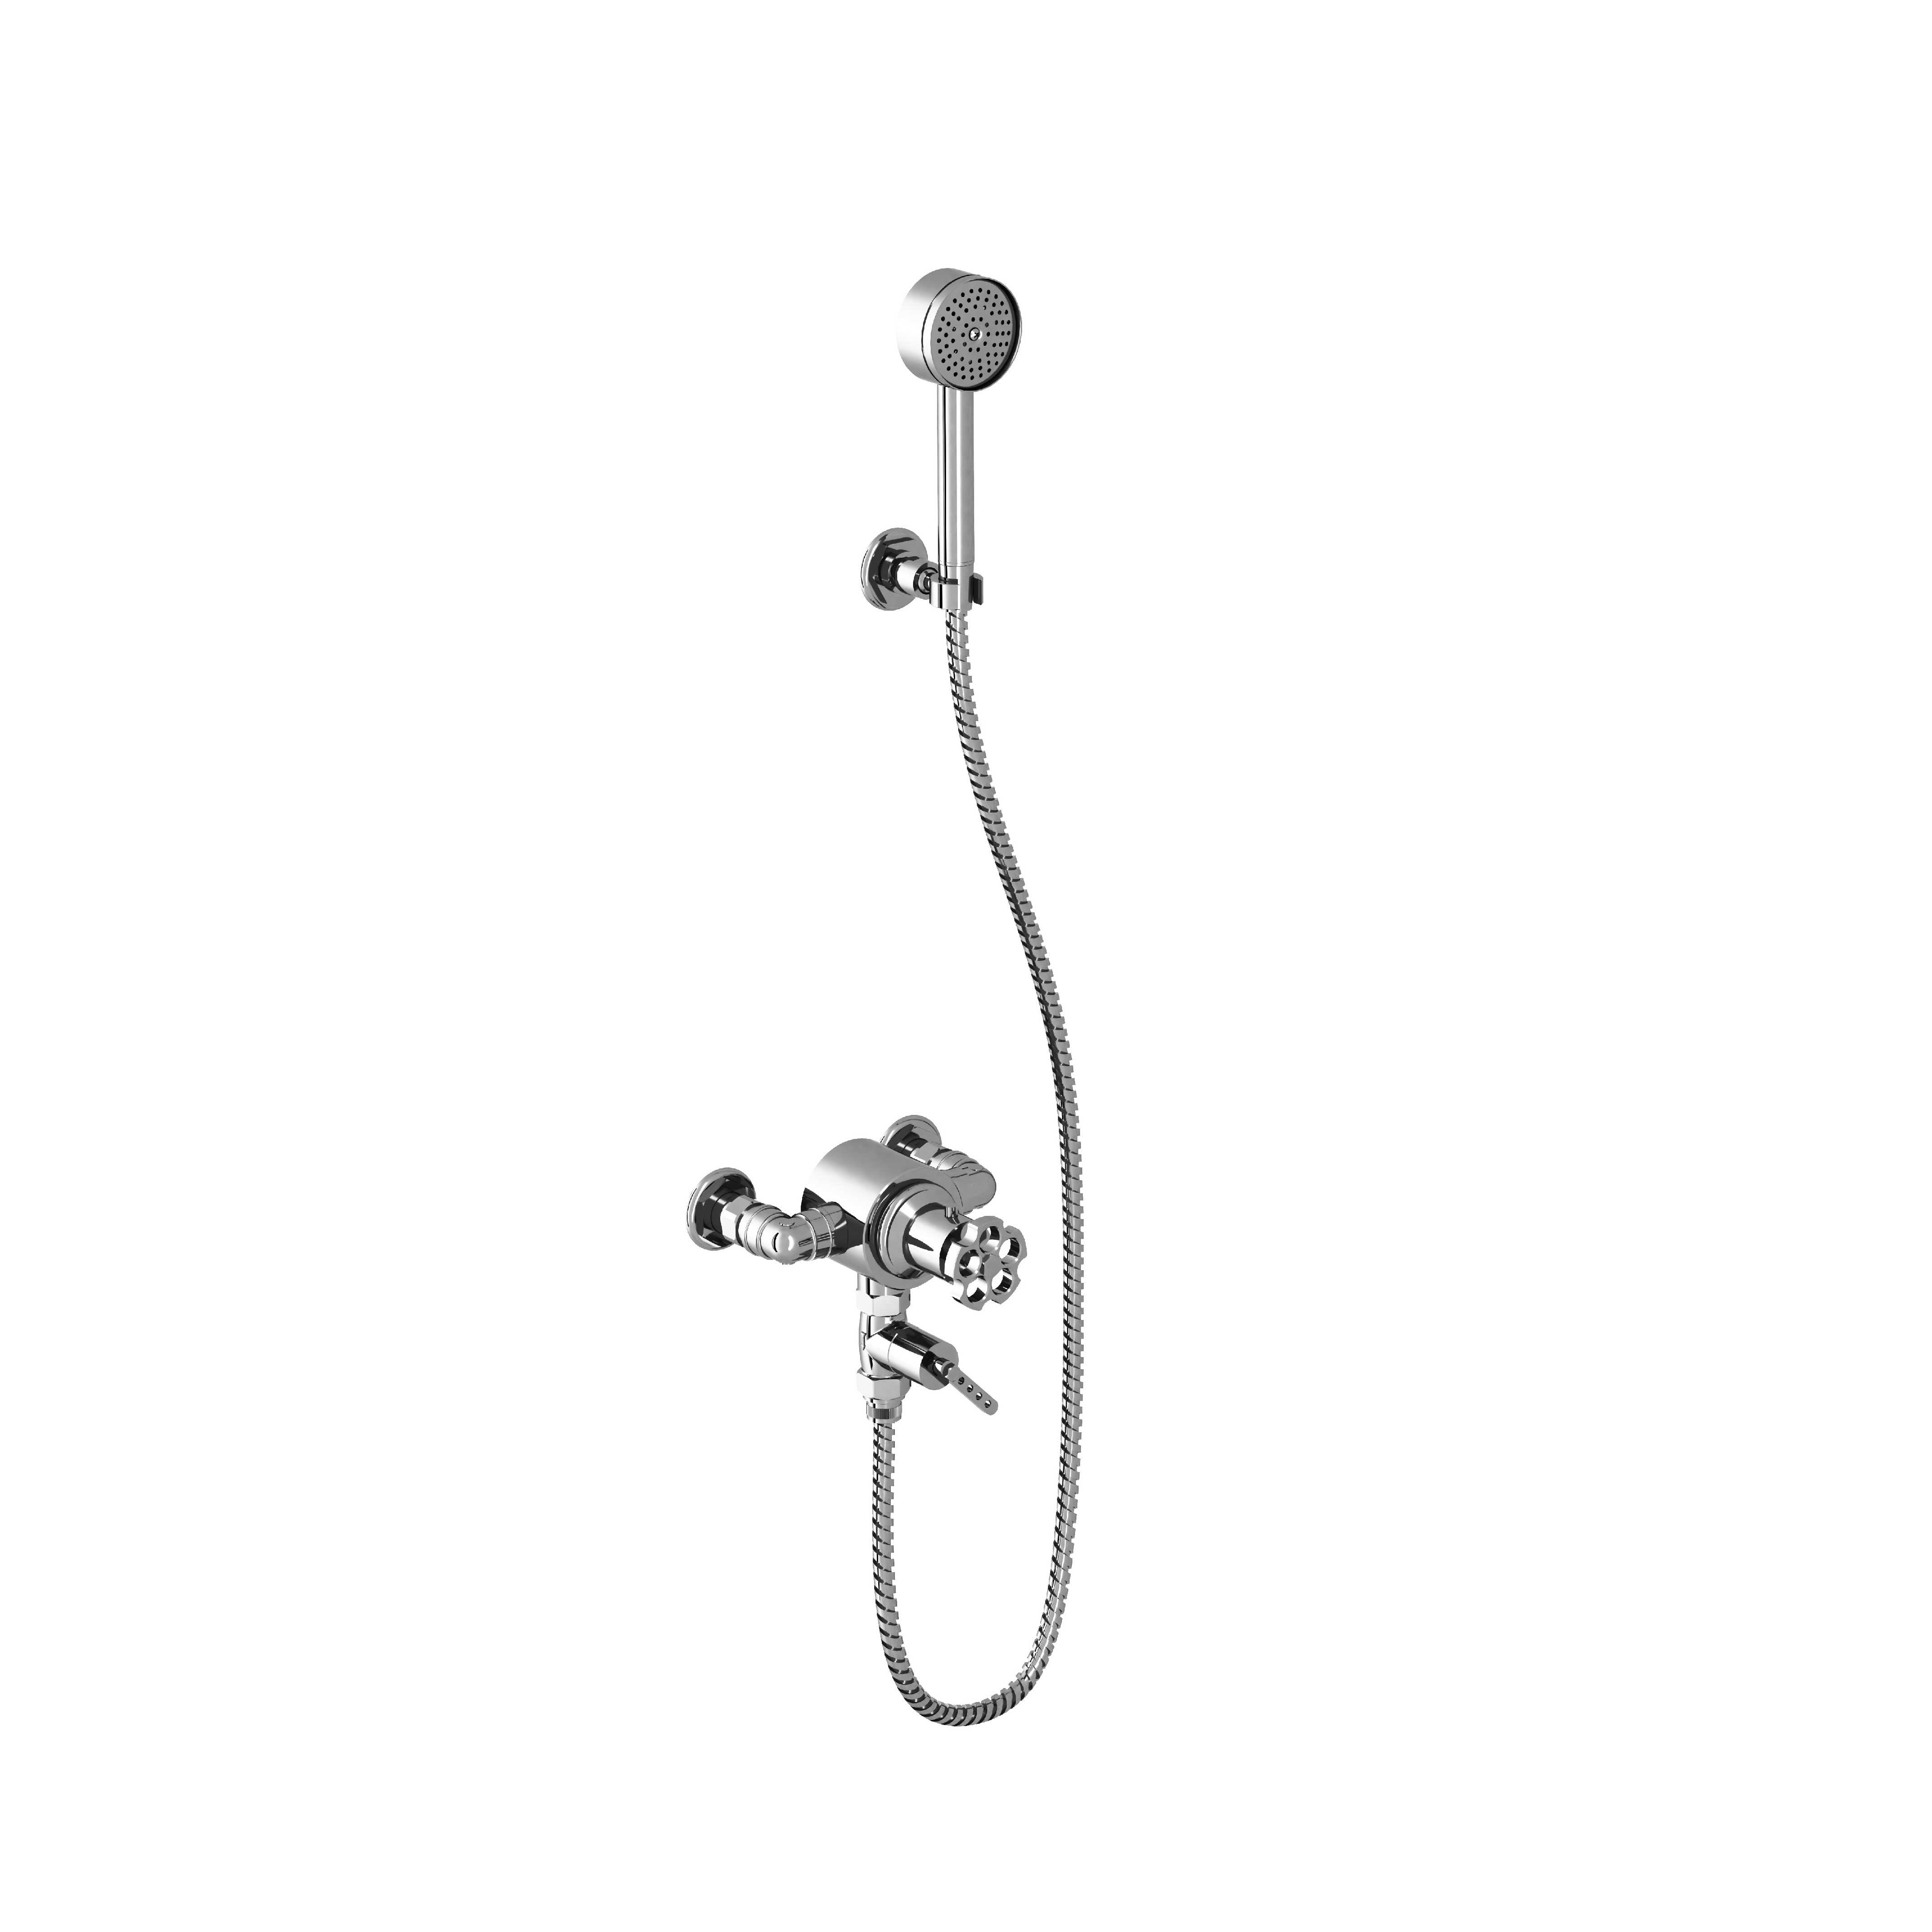 M81-2201T Thermostatic shower mixer with hook